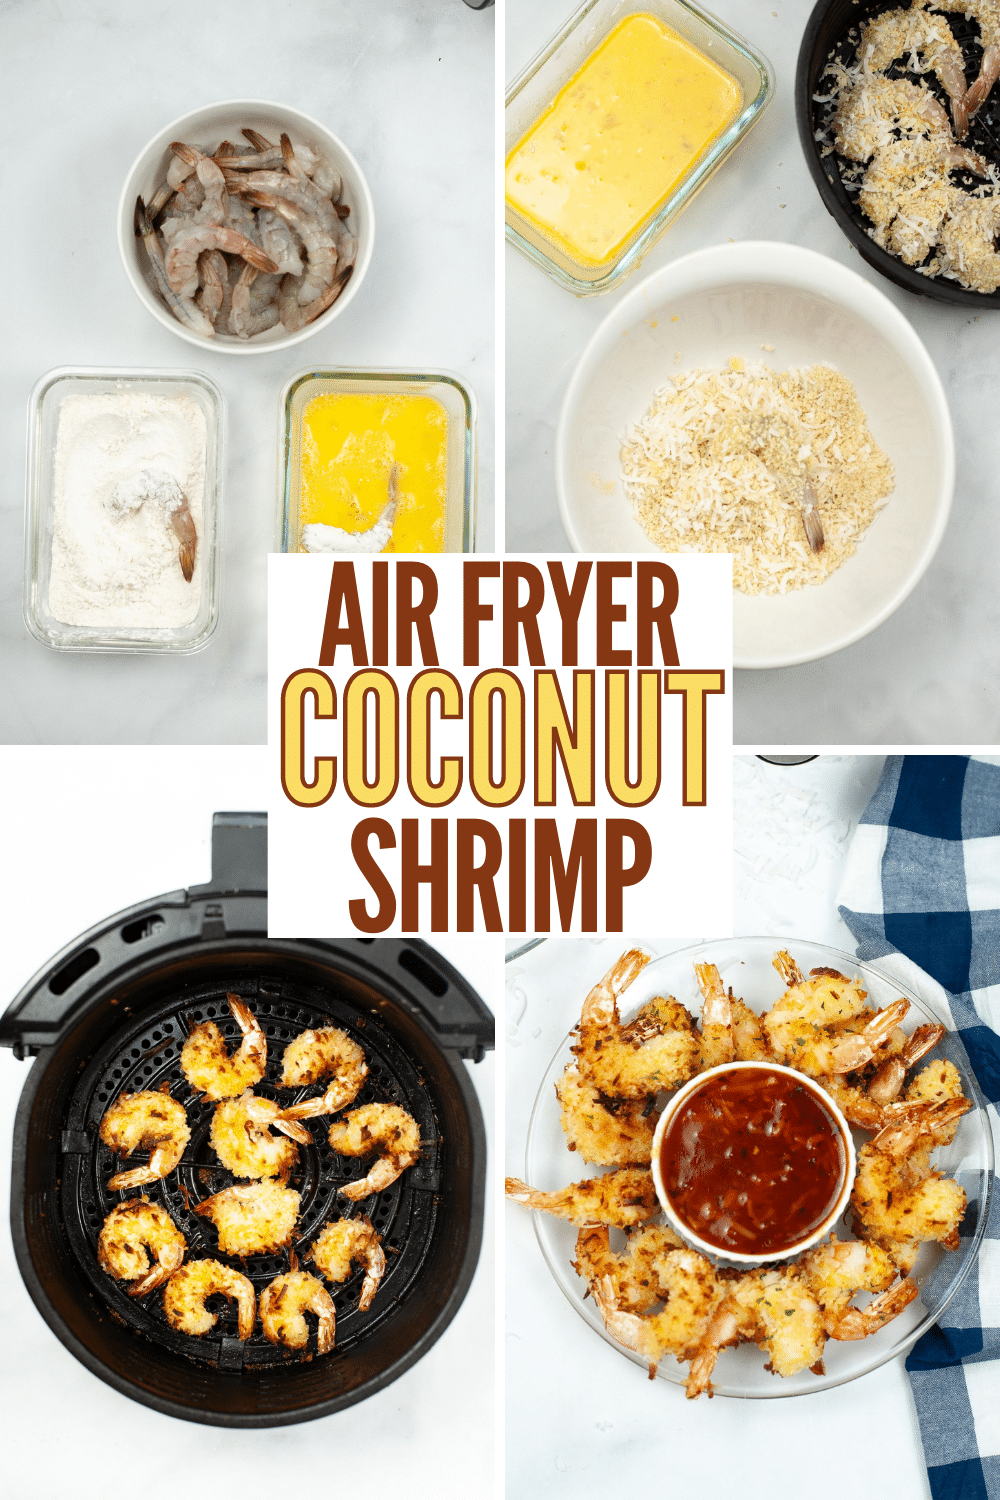 Air Fried Coconut Shrimp is a healthier version of this family-favorite recipe. Not only is the recipe healthy, but it’s also easy to make. #airfryer #airfried #shrimp #coconutshrimp via @wondermomwannab